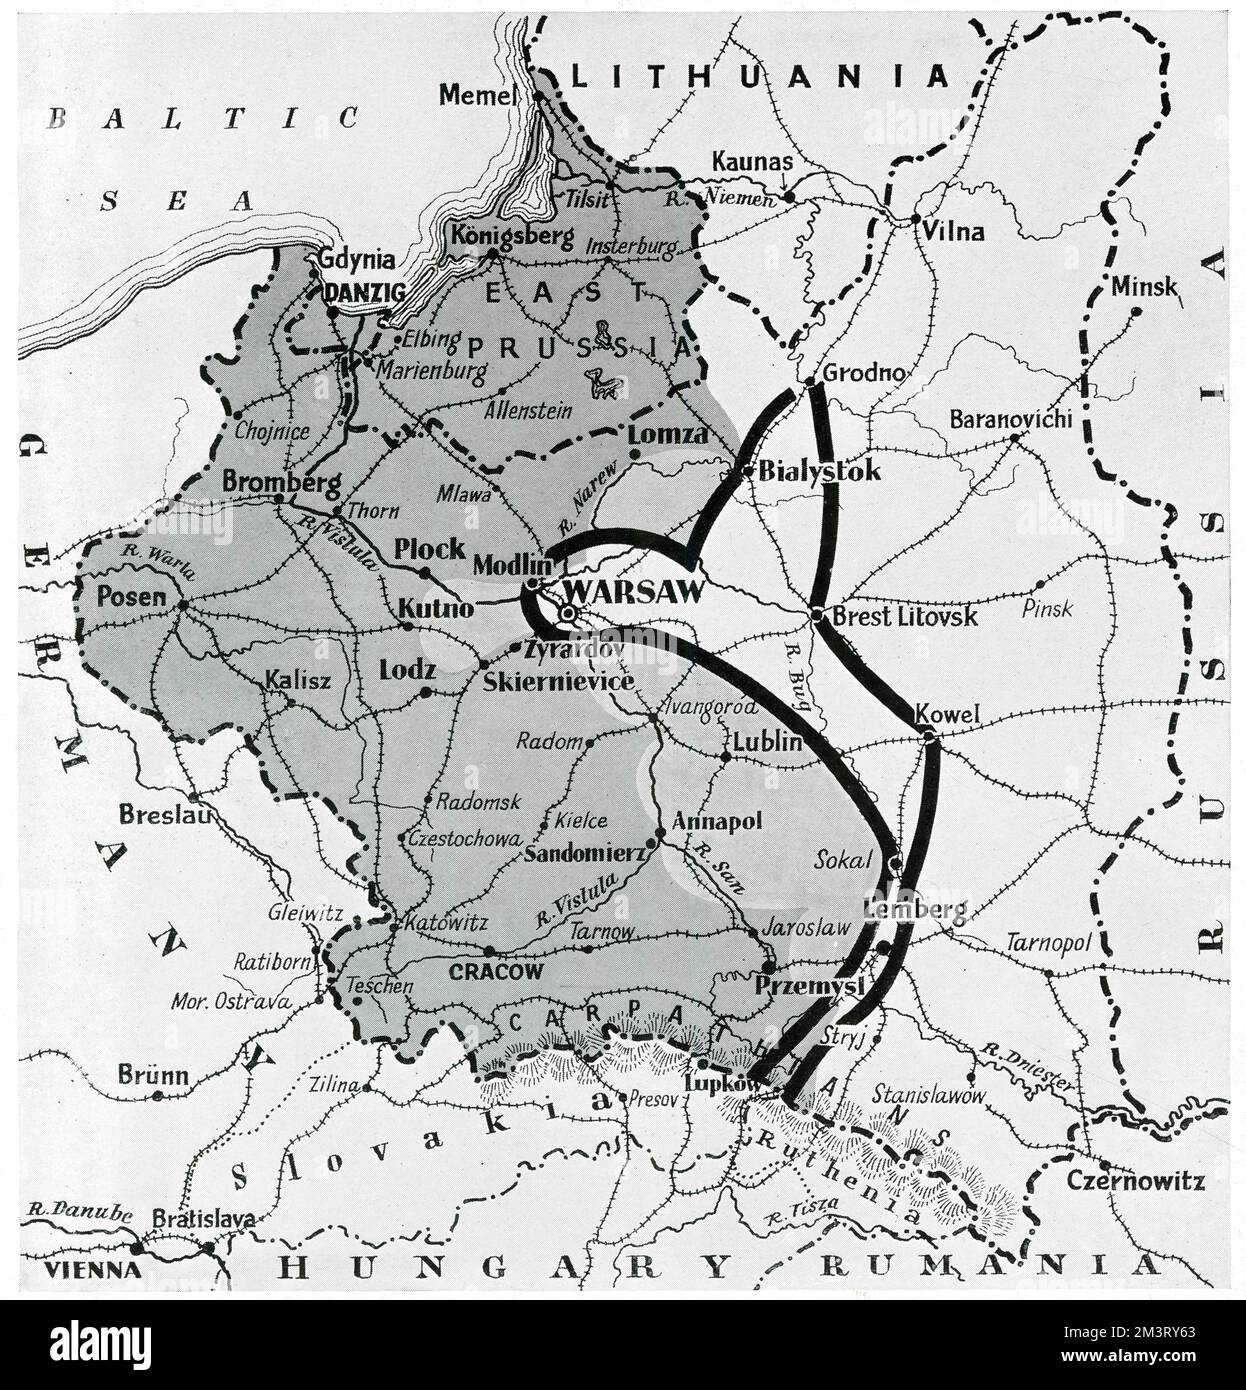 Map of Poland showing the progress of the German invasion. The thick black line represents the Polish line of defence at the time of printing, while the border between the darker tint and lighter tint shows their line from the week before. The dark tint represents the territory taken by Germany a week or more before printing and the lighter tint, territory fallen to Germany most recently. Looking on the other side of the Polish defence line, now a mere loop around the Warsaw area, the lightest tint represents the territory taken by the &quot;rescuing&quot; Russian forces. The Sphere describes Stock Photo